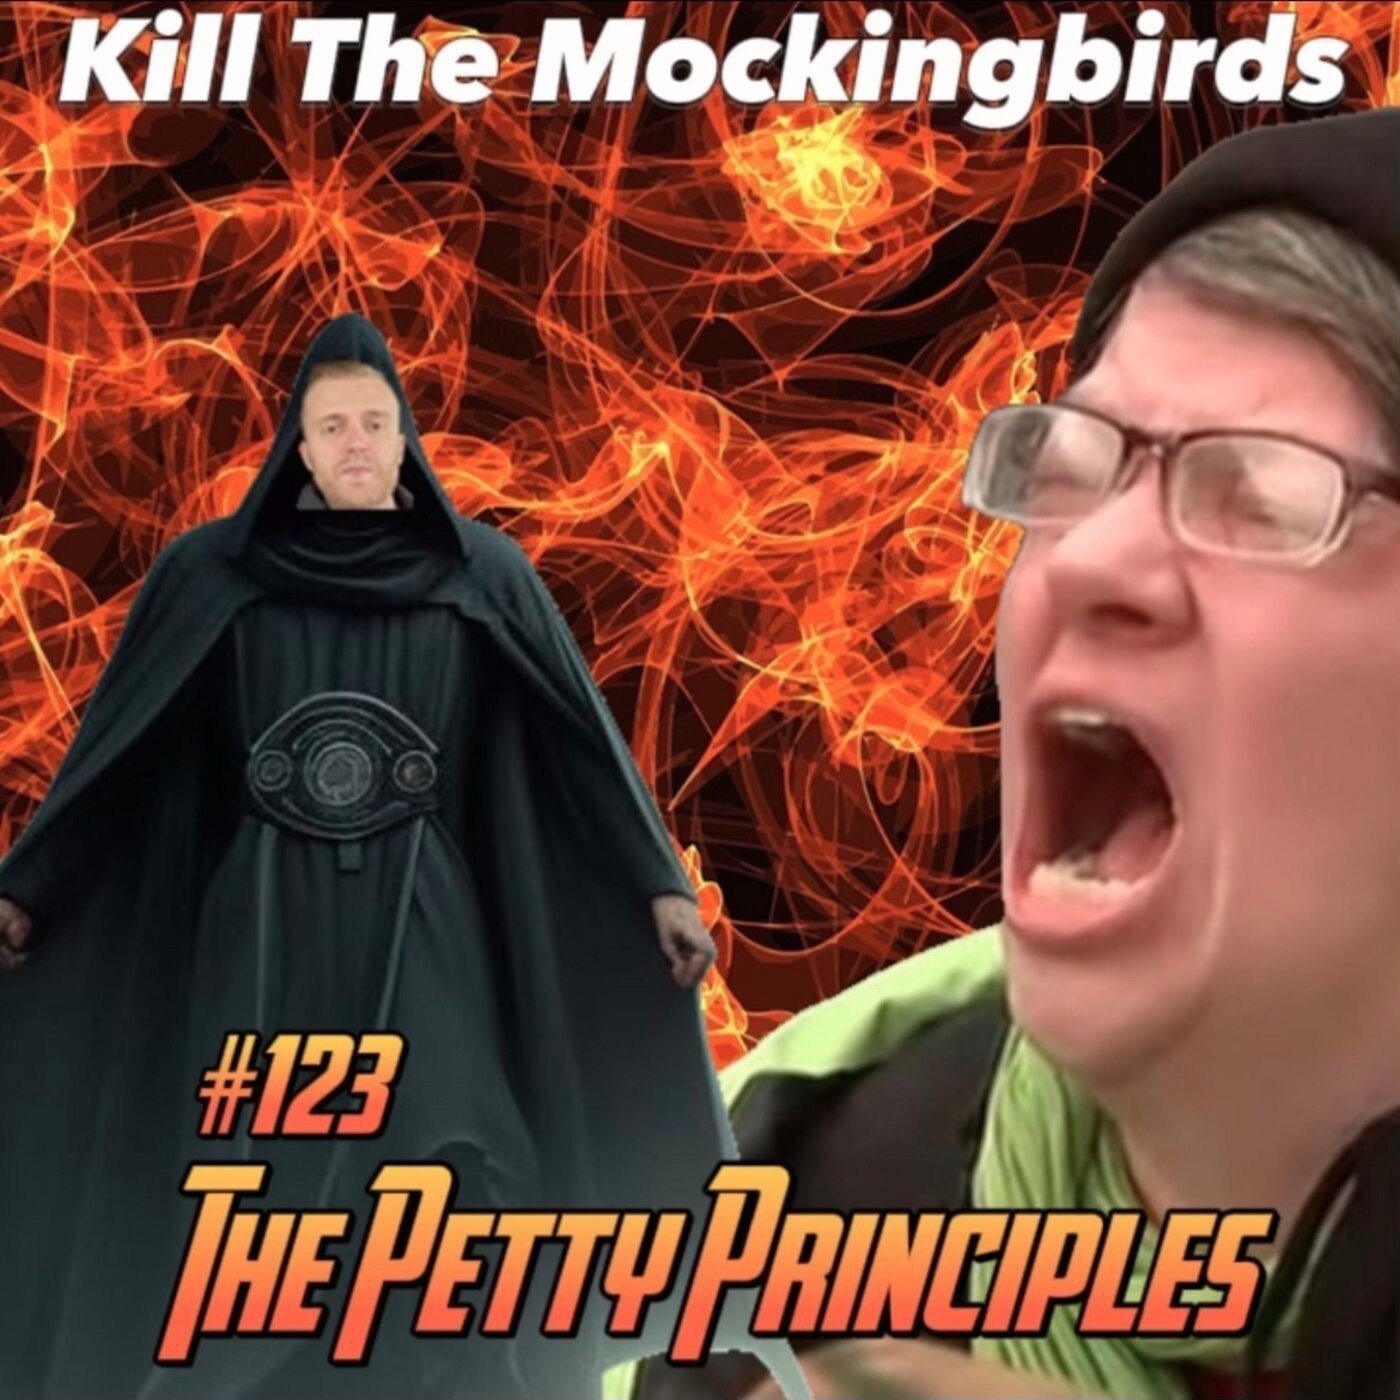 #123 “THE PETTY PRINCIPLES” w/ Lord Petty